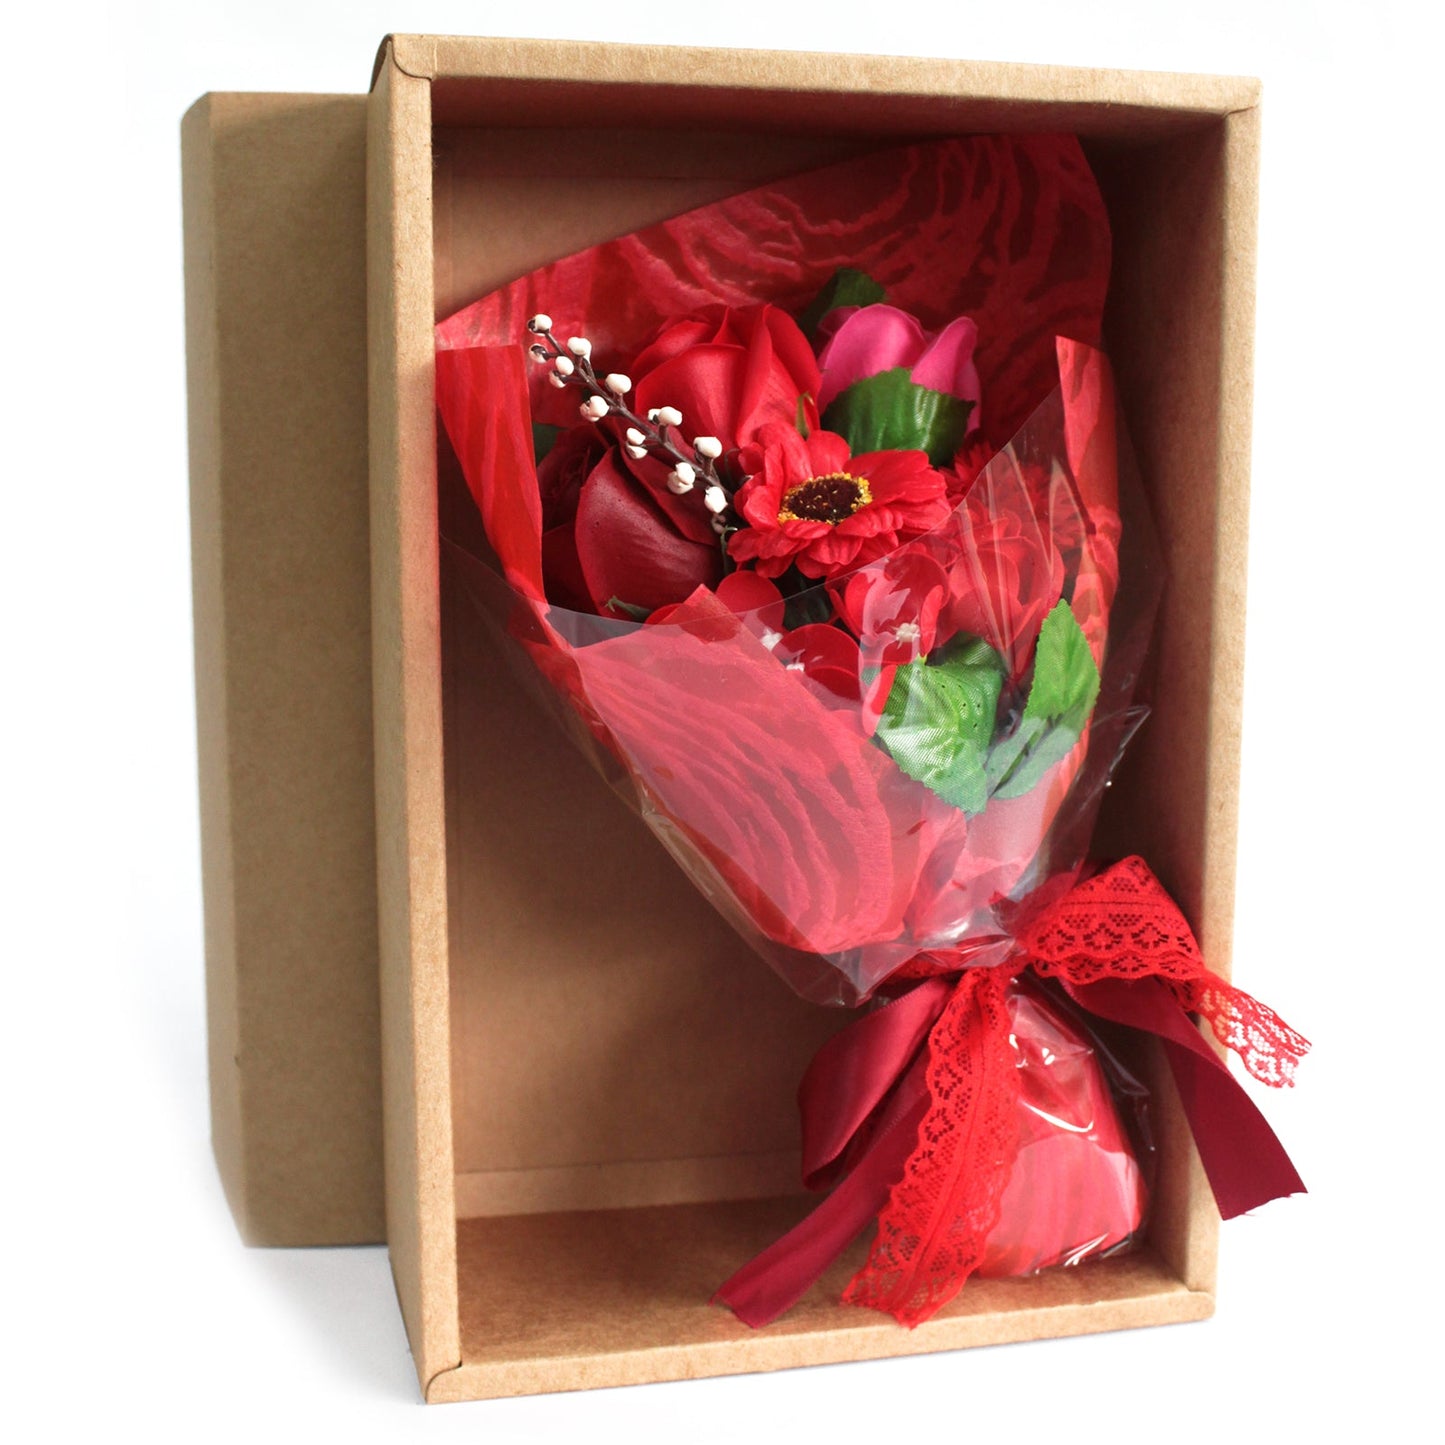 Flower Soap Bouquet - Gift Boxed Soap Flowers Soul Inspired Red 